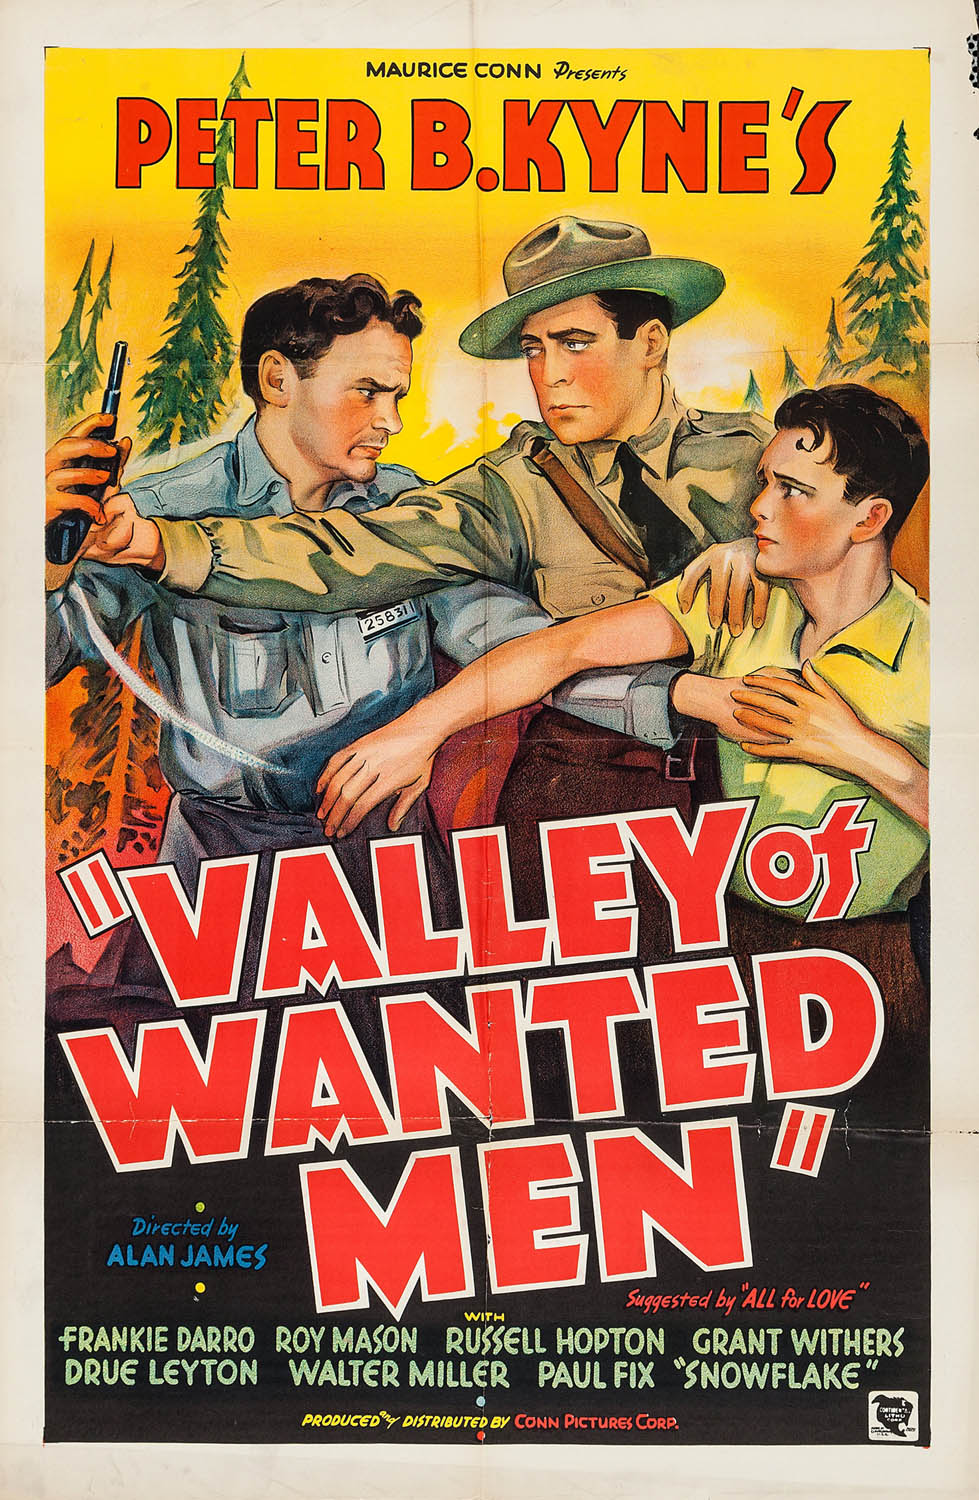 VALLEY OF WANTED MEN